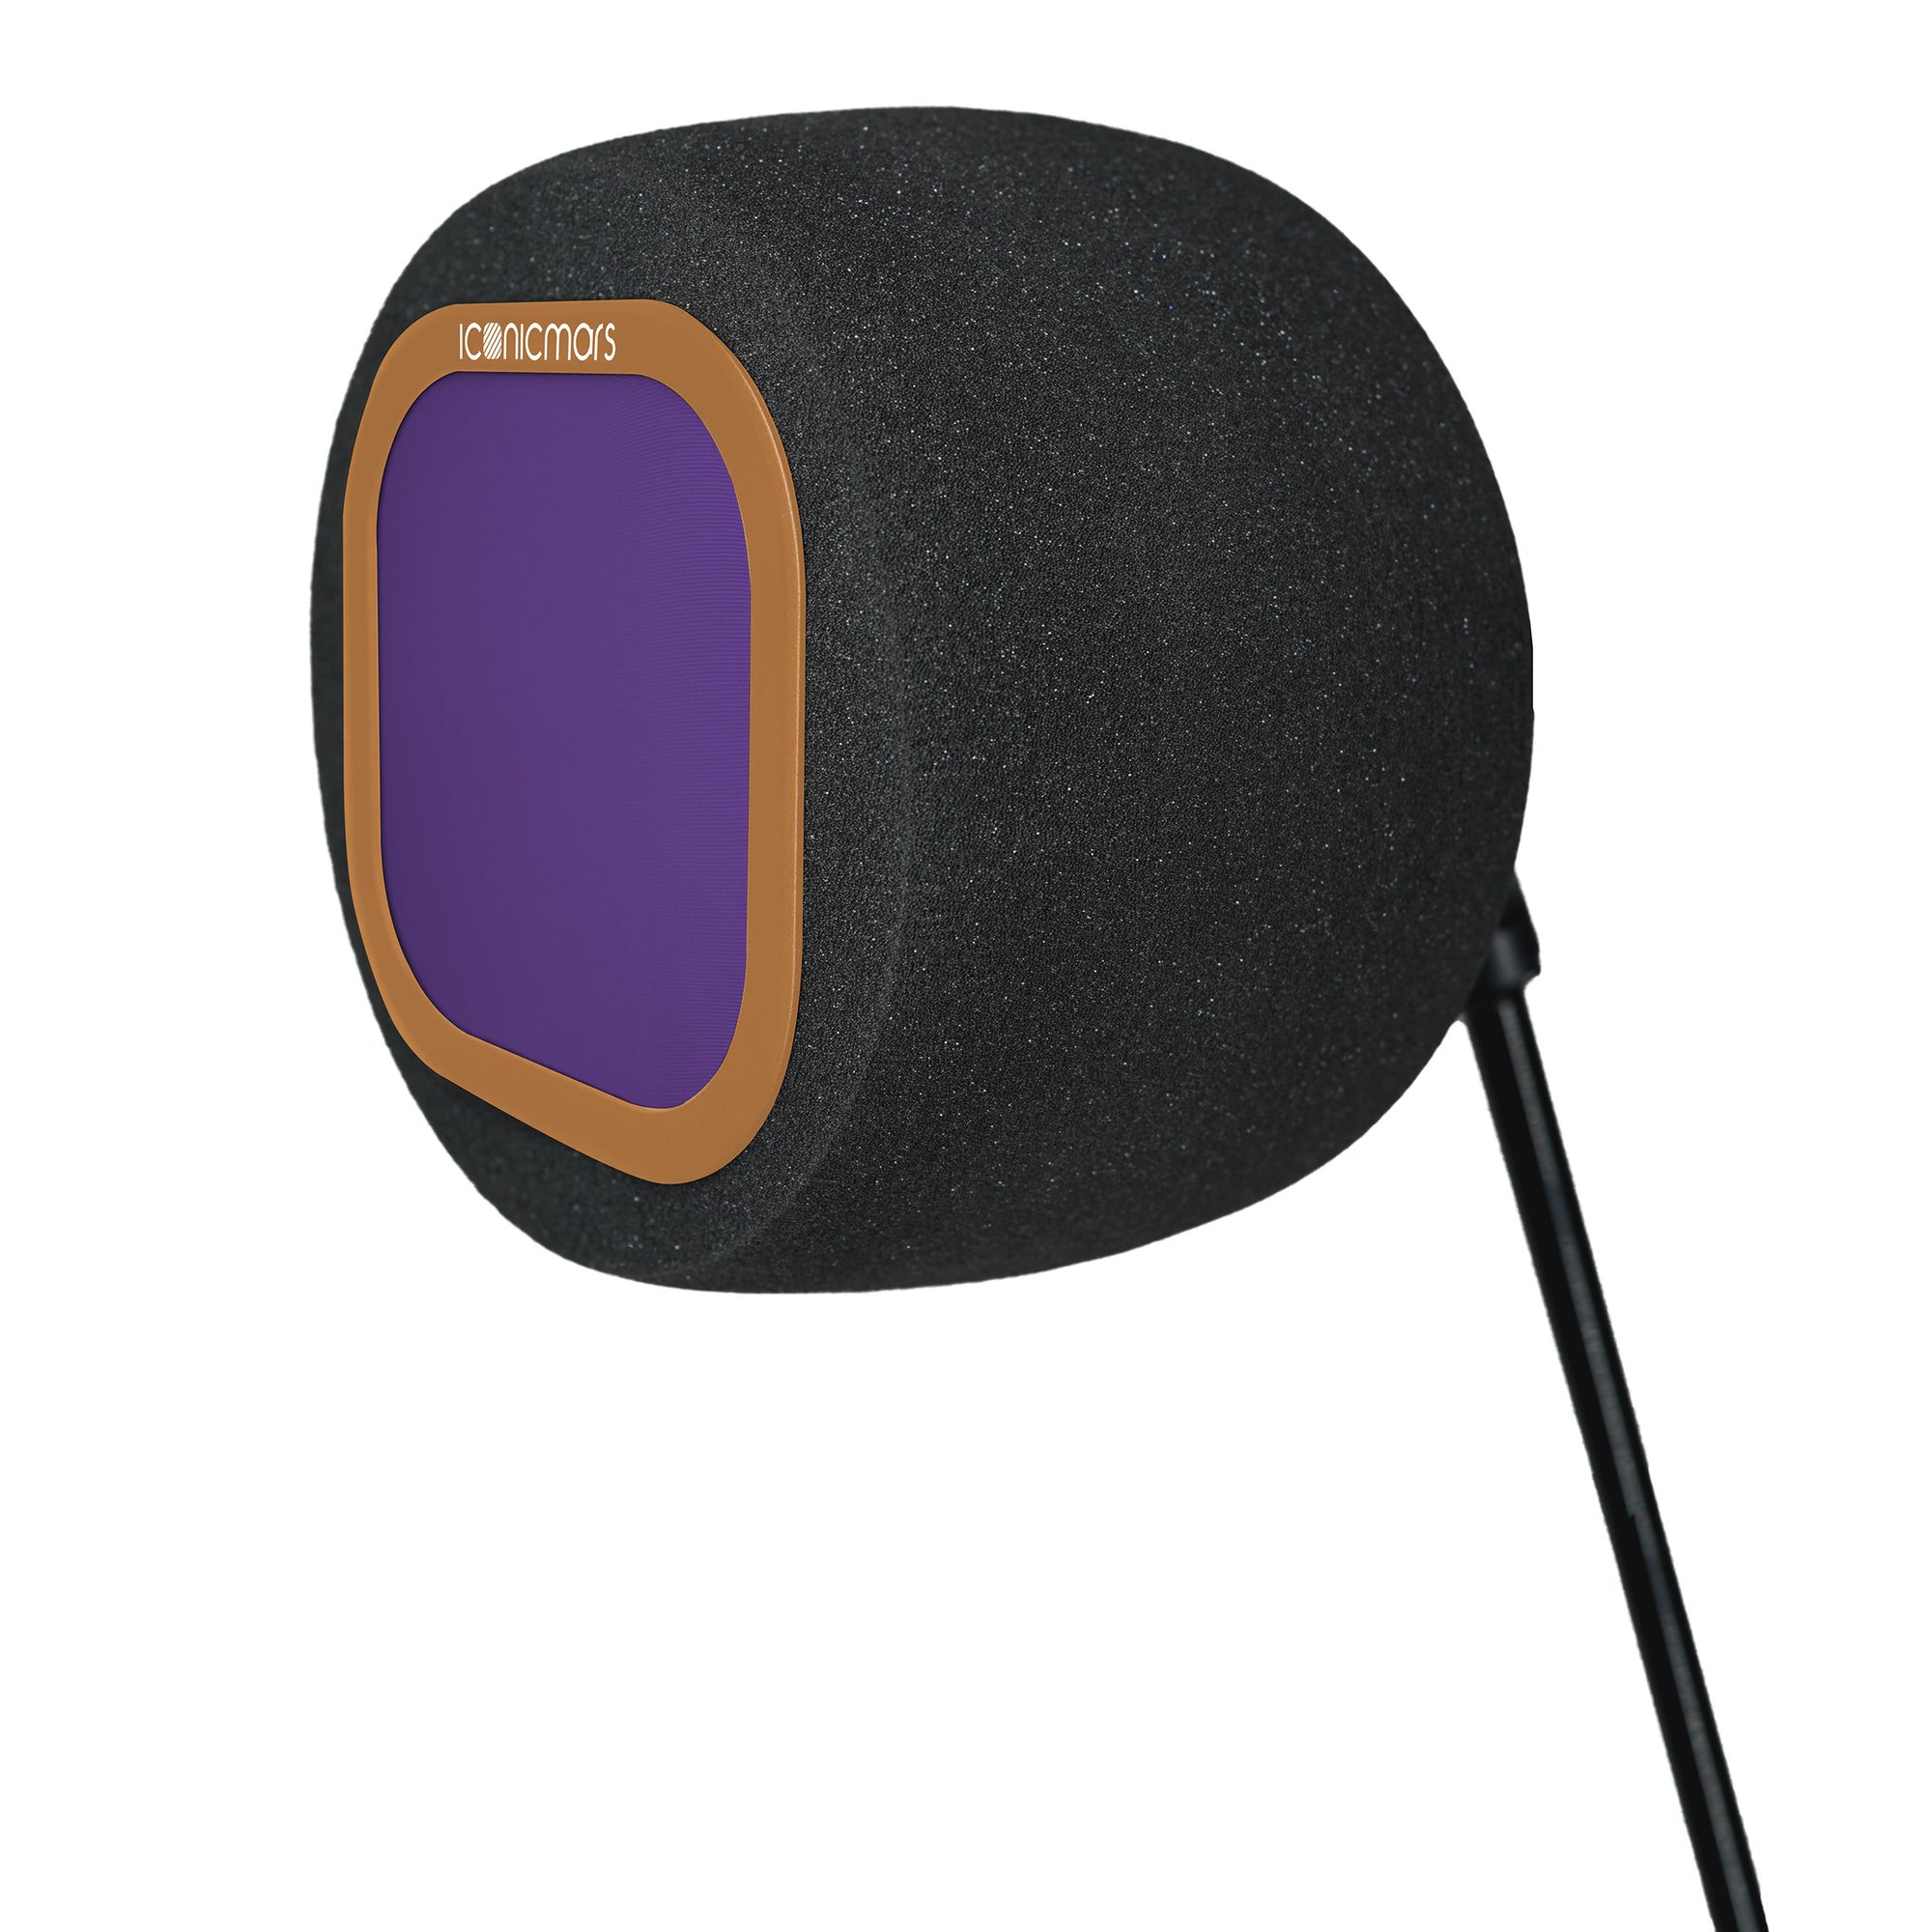 Comet X7A side view with pop filter off showing mic chamber, eyeball like design for front facing micrphone  -- PB&J